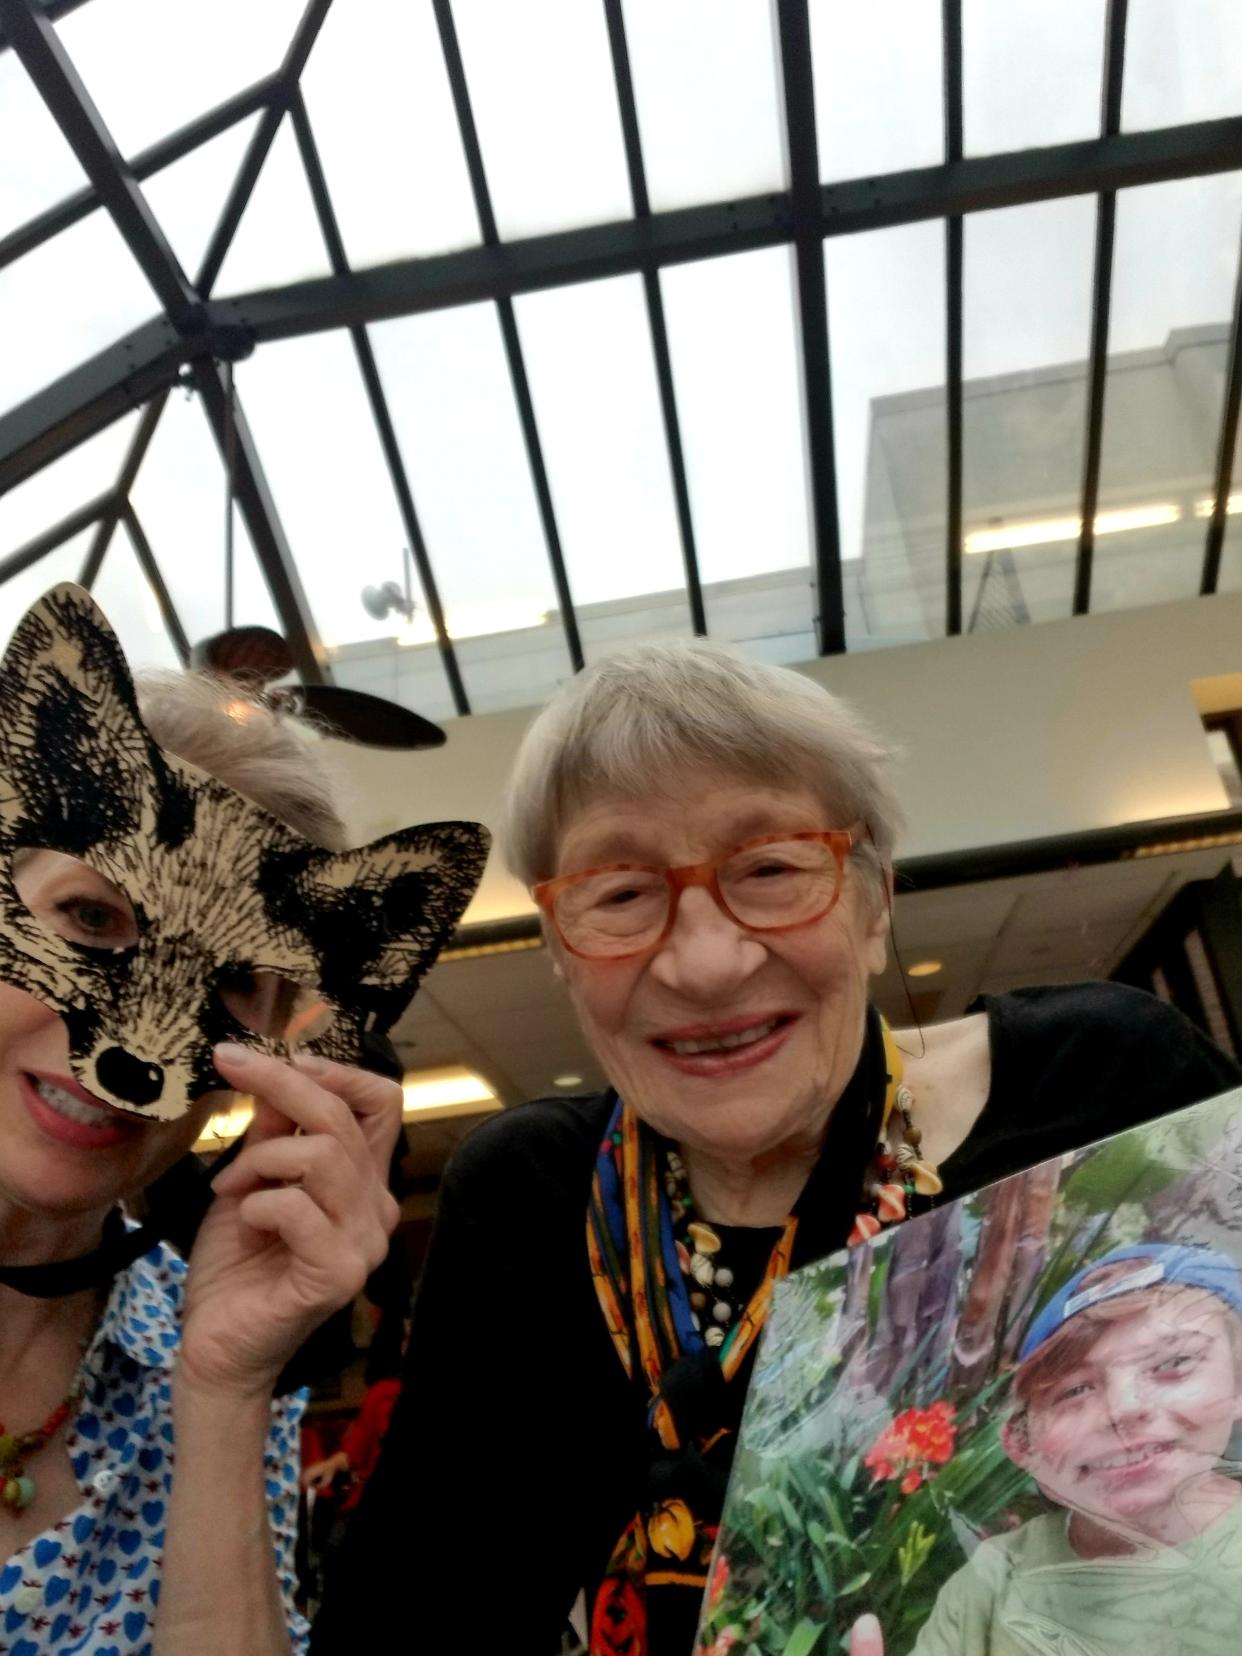 In 2019, Grace Campbell (right) dressed up for Halloween as "Grandma Noonie," which is what her grandson called her. She had become a resident of The Riverside Premier Rehabilitation and Healing Center in Manhattan earlier that year. Daughter Claire Campbell (right) said care for her mother was often delayed or missed because of understaffing – even after the pandemic had settled down.